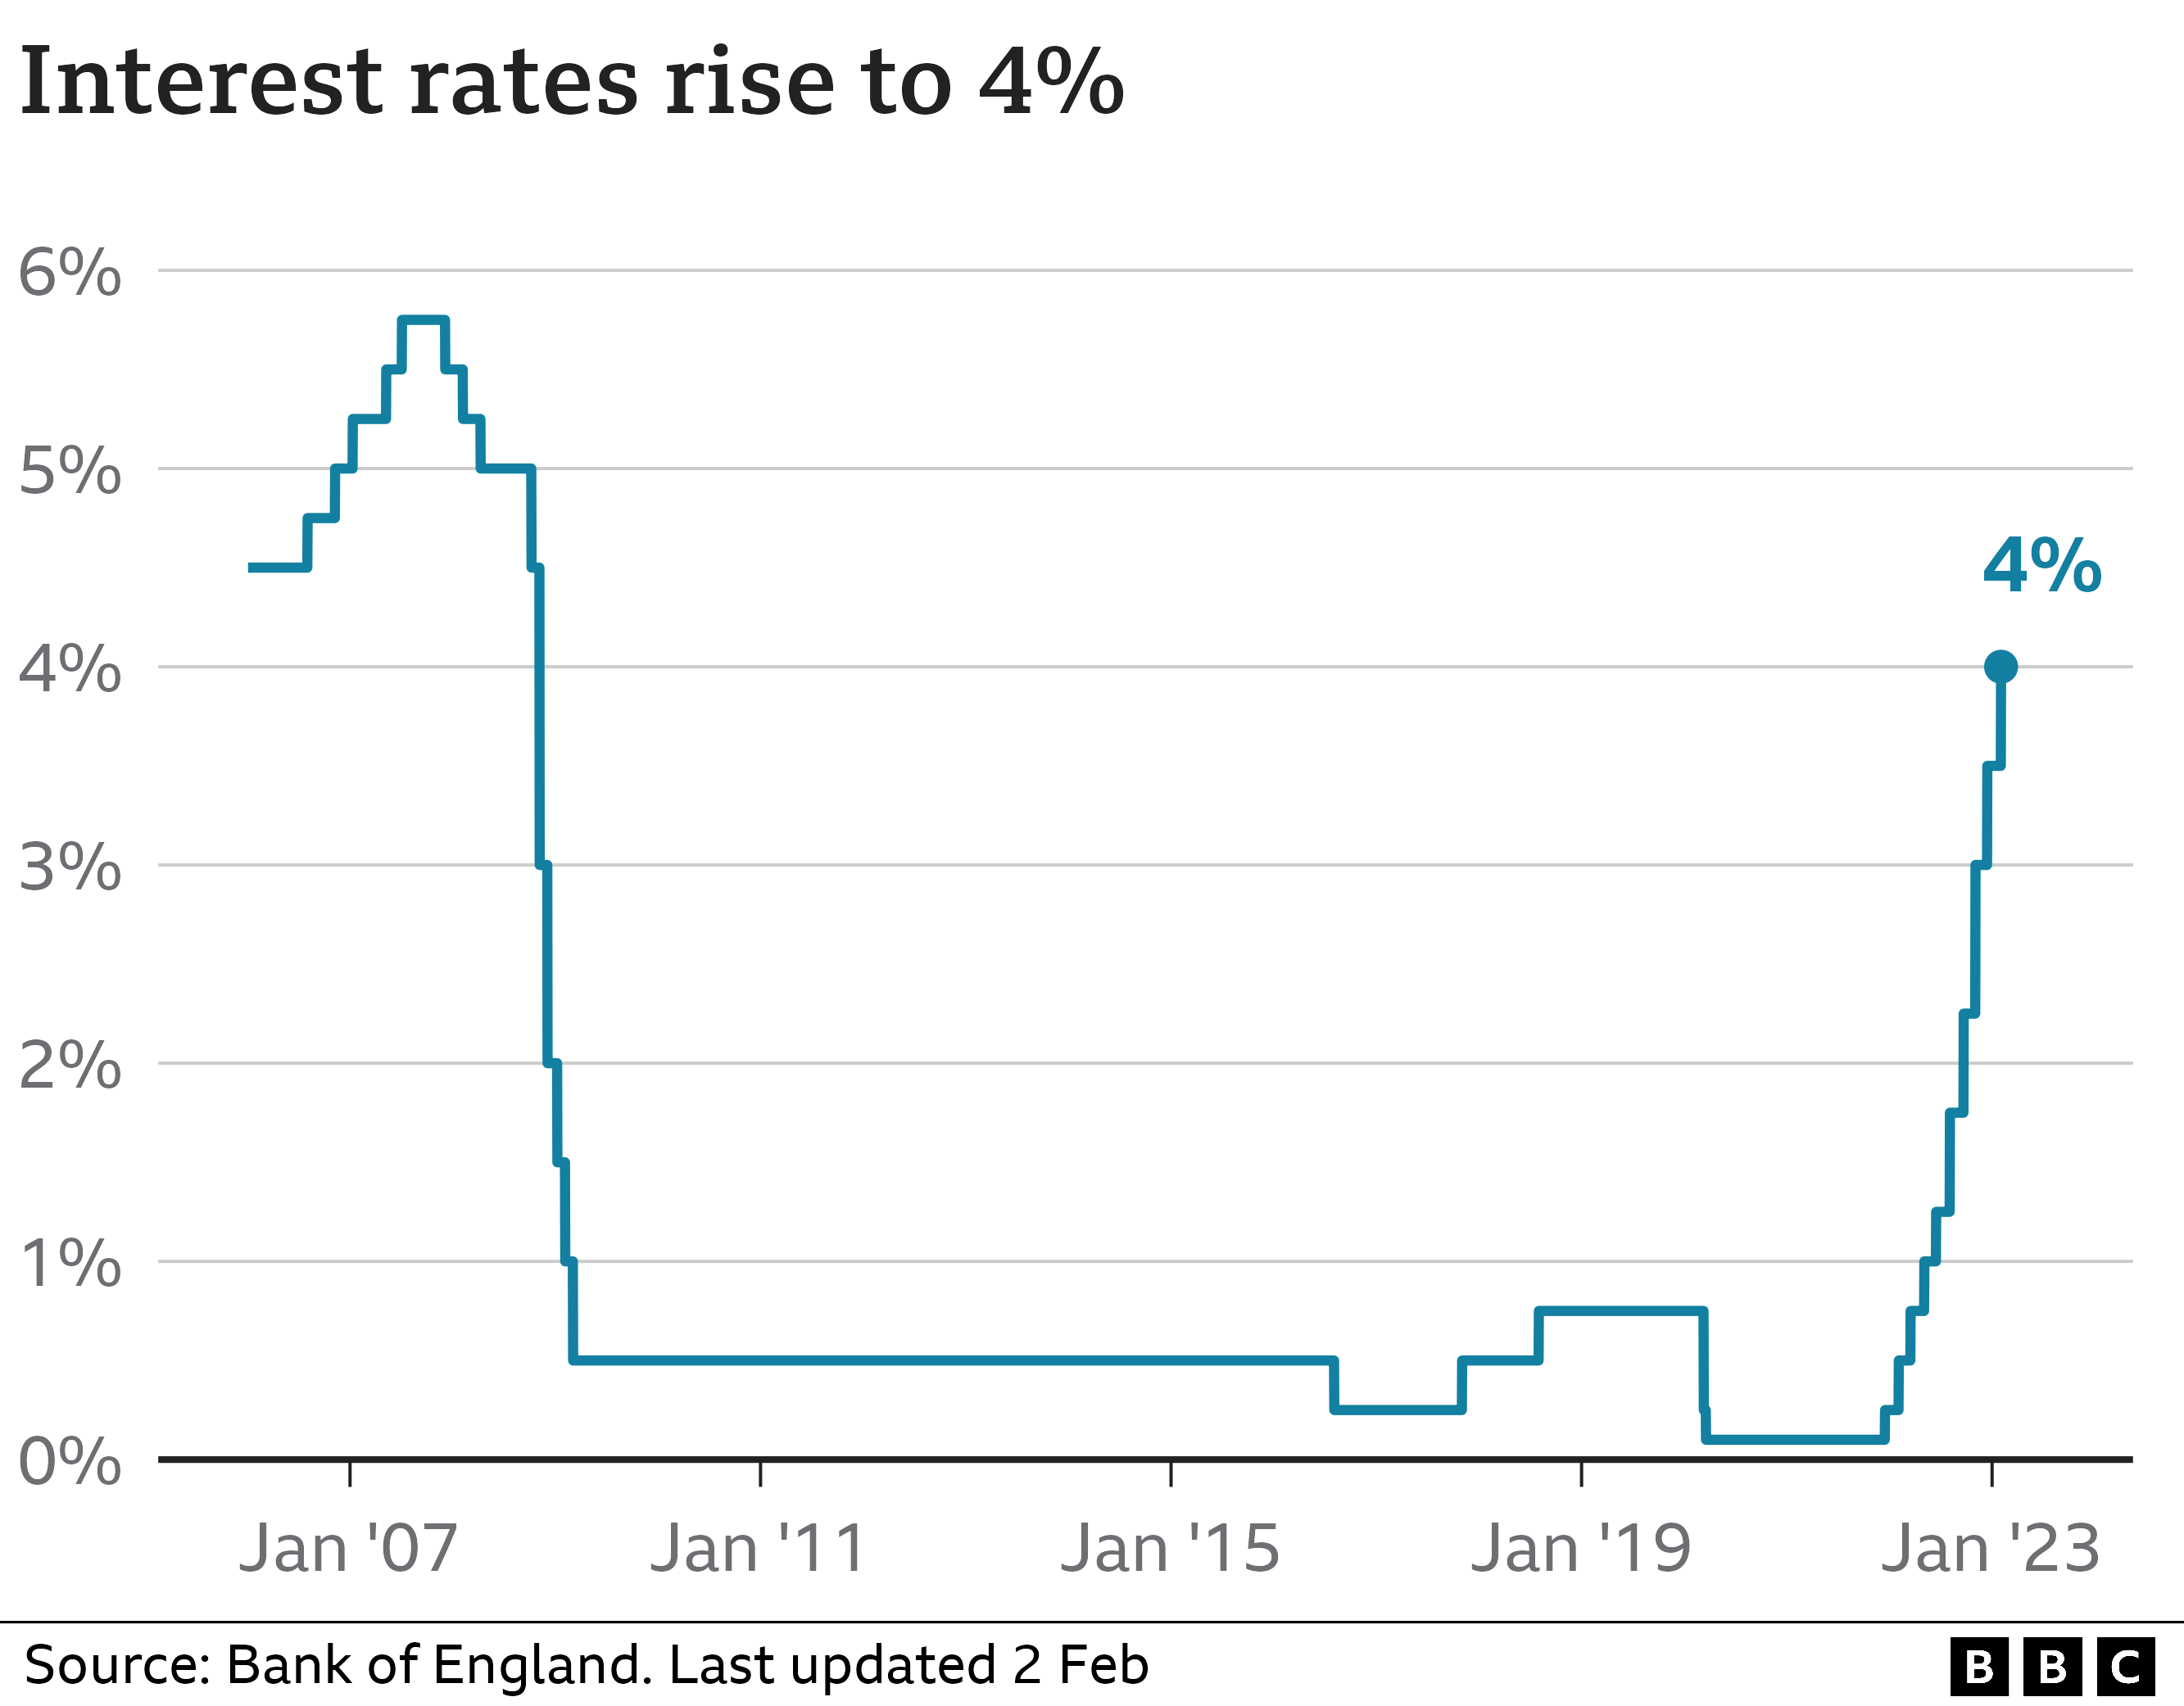 Graphic showing interest rates rising to 4%